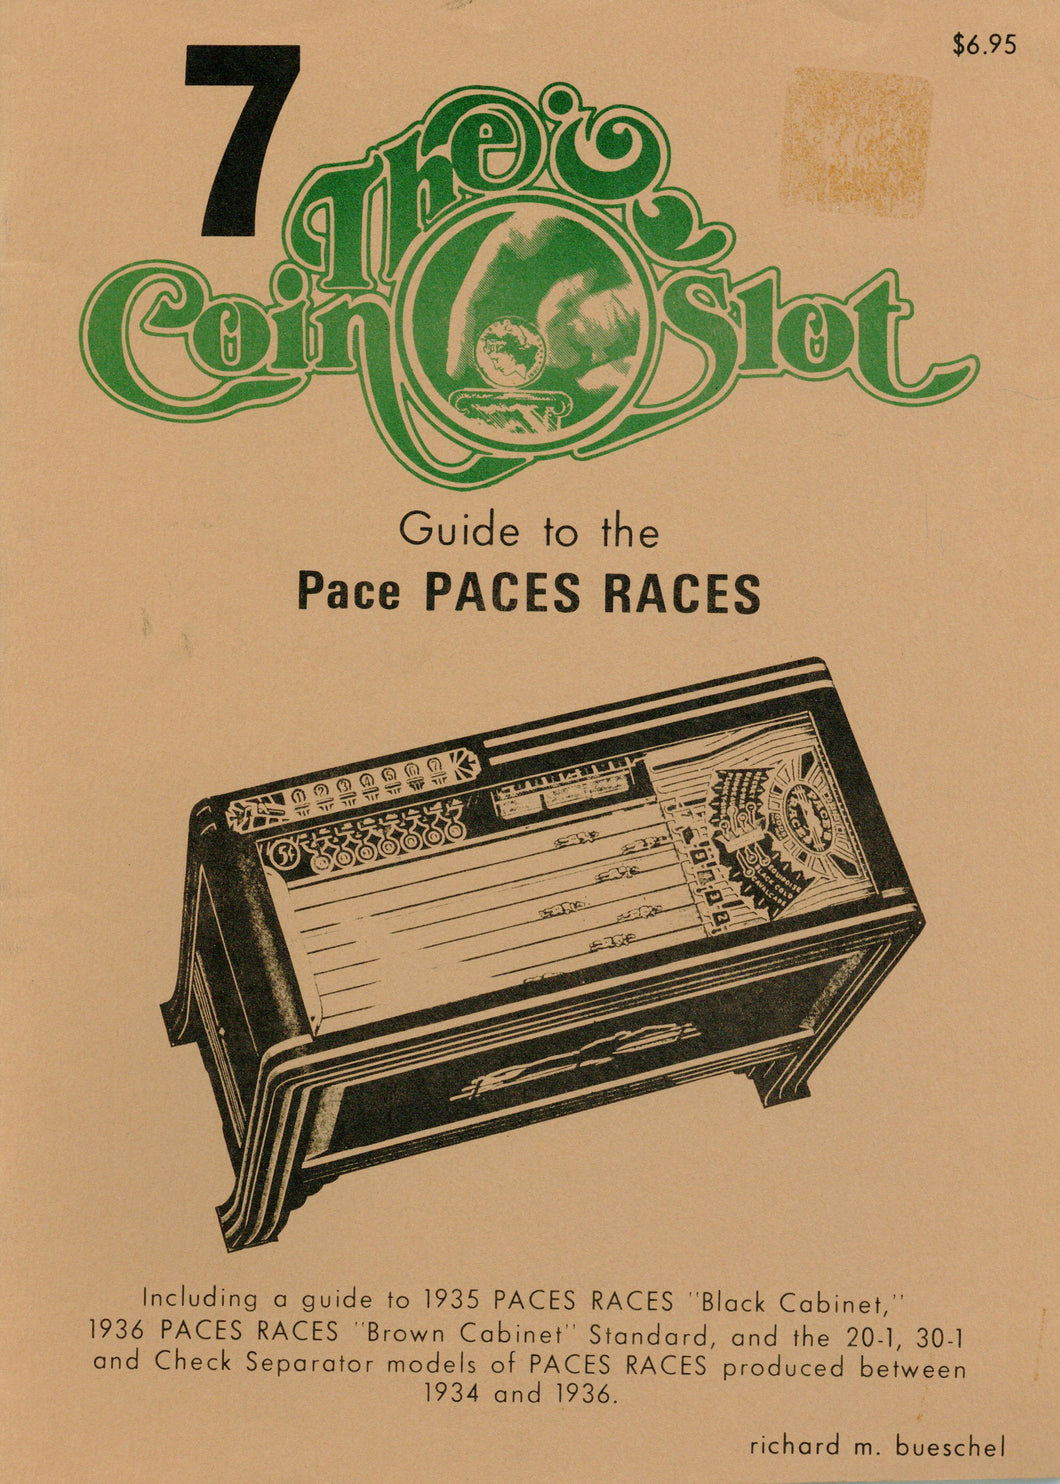 Coin Slot # 7. Guide to the Paces Races